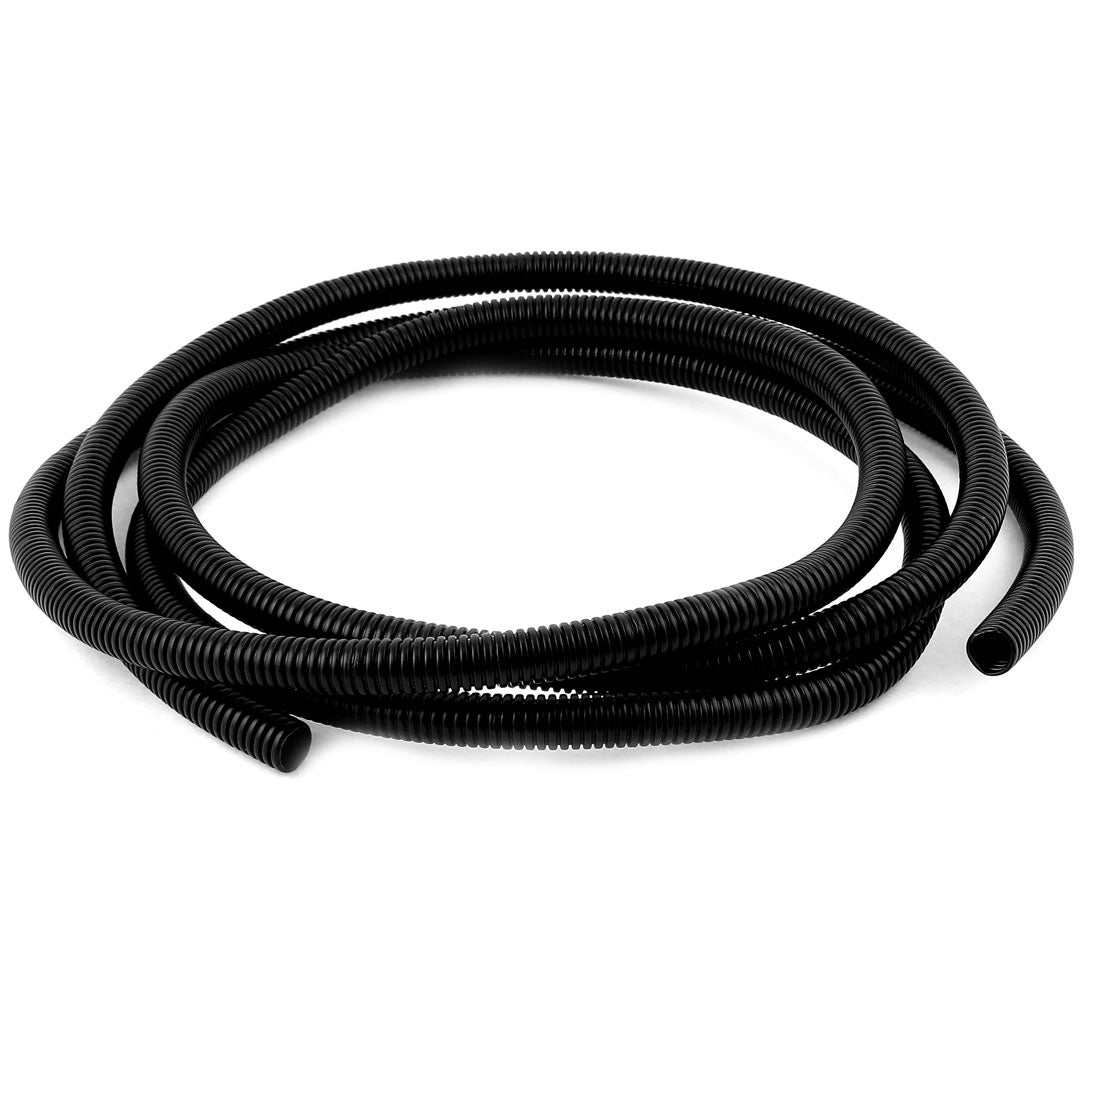 uxcell Uxcell 2.7 M 10 x 13 mm Plastic Corrugated Conduit Tube for Garden,Office Black